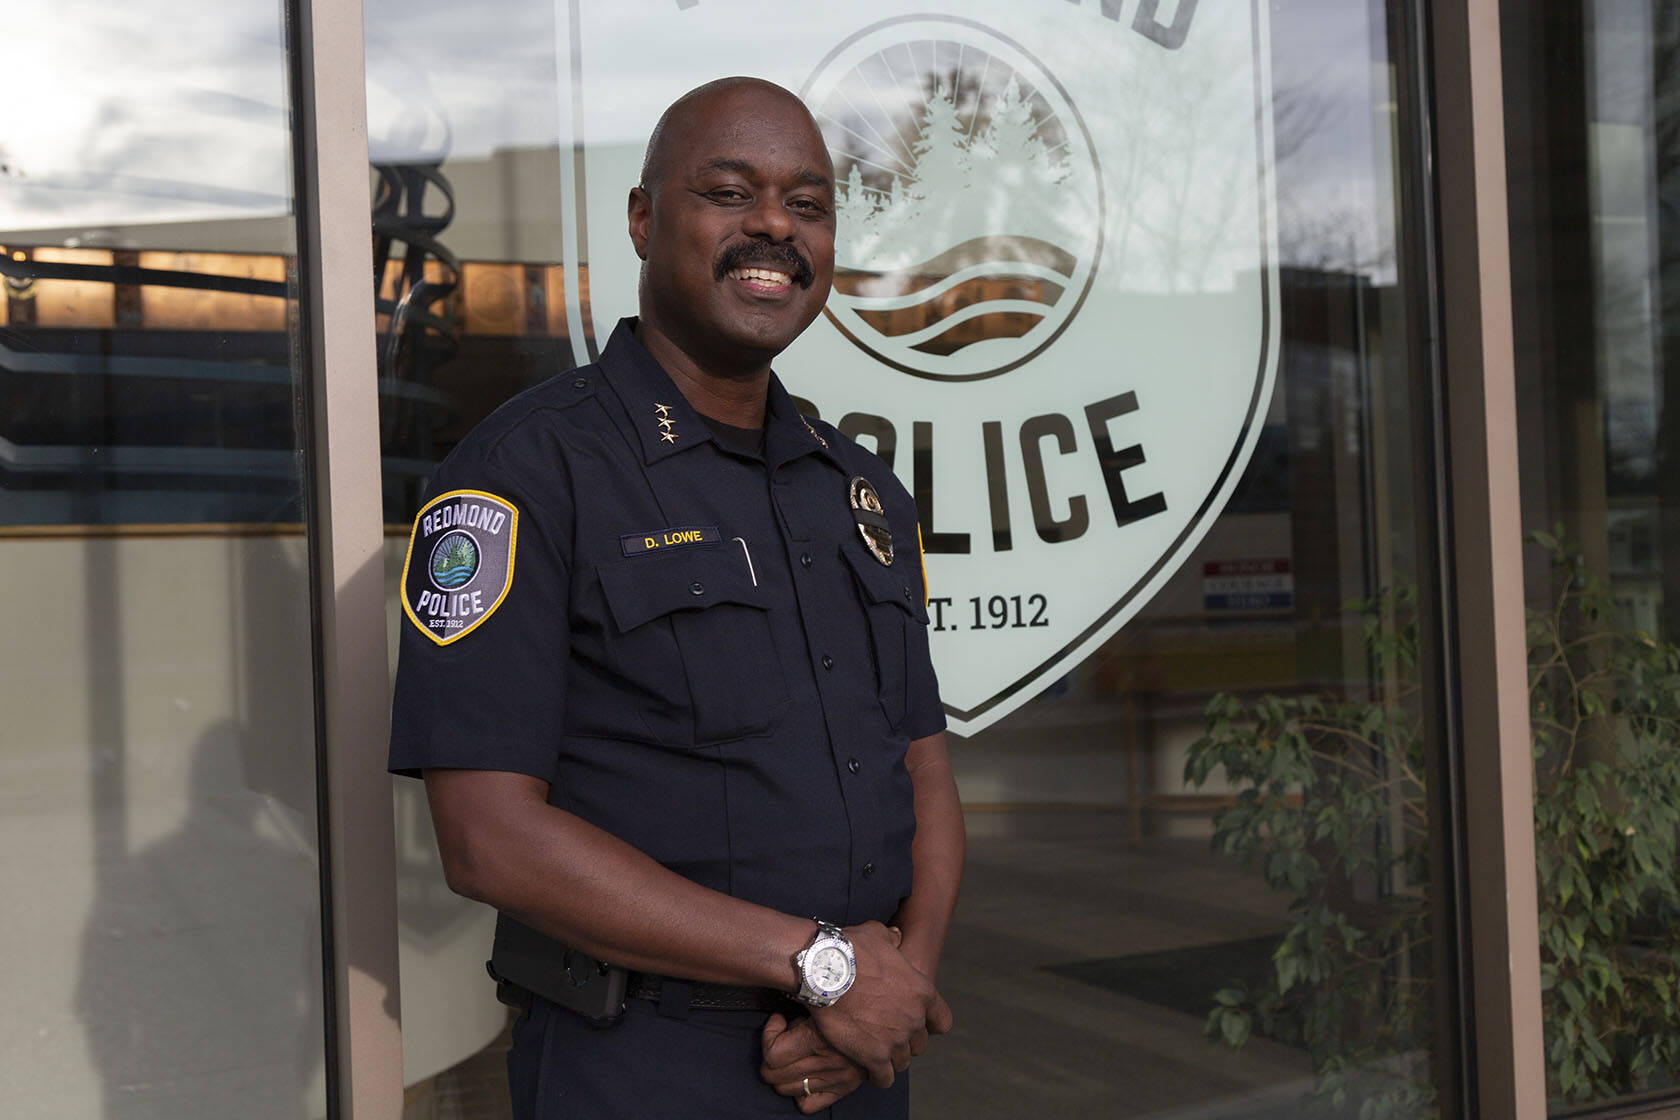 Redmond’s new police chief Darrell Lowe stands outside the Redmond Police Department on Nov. 13. Lowe comes from Santa Monica PD, where he spent 27 years serving. Staff photo/Ashley Hiruko